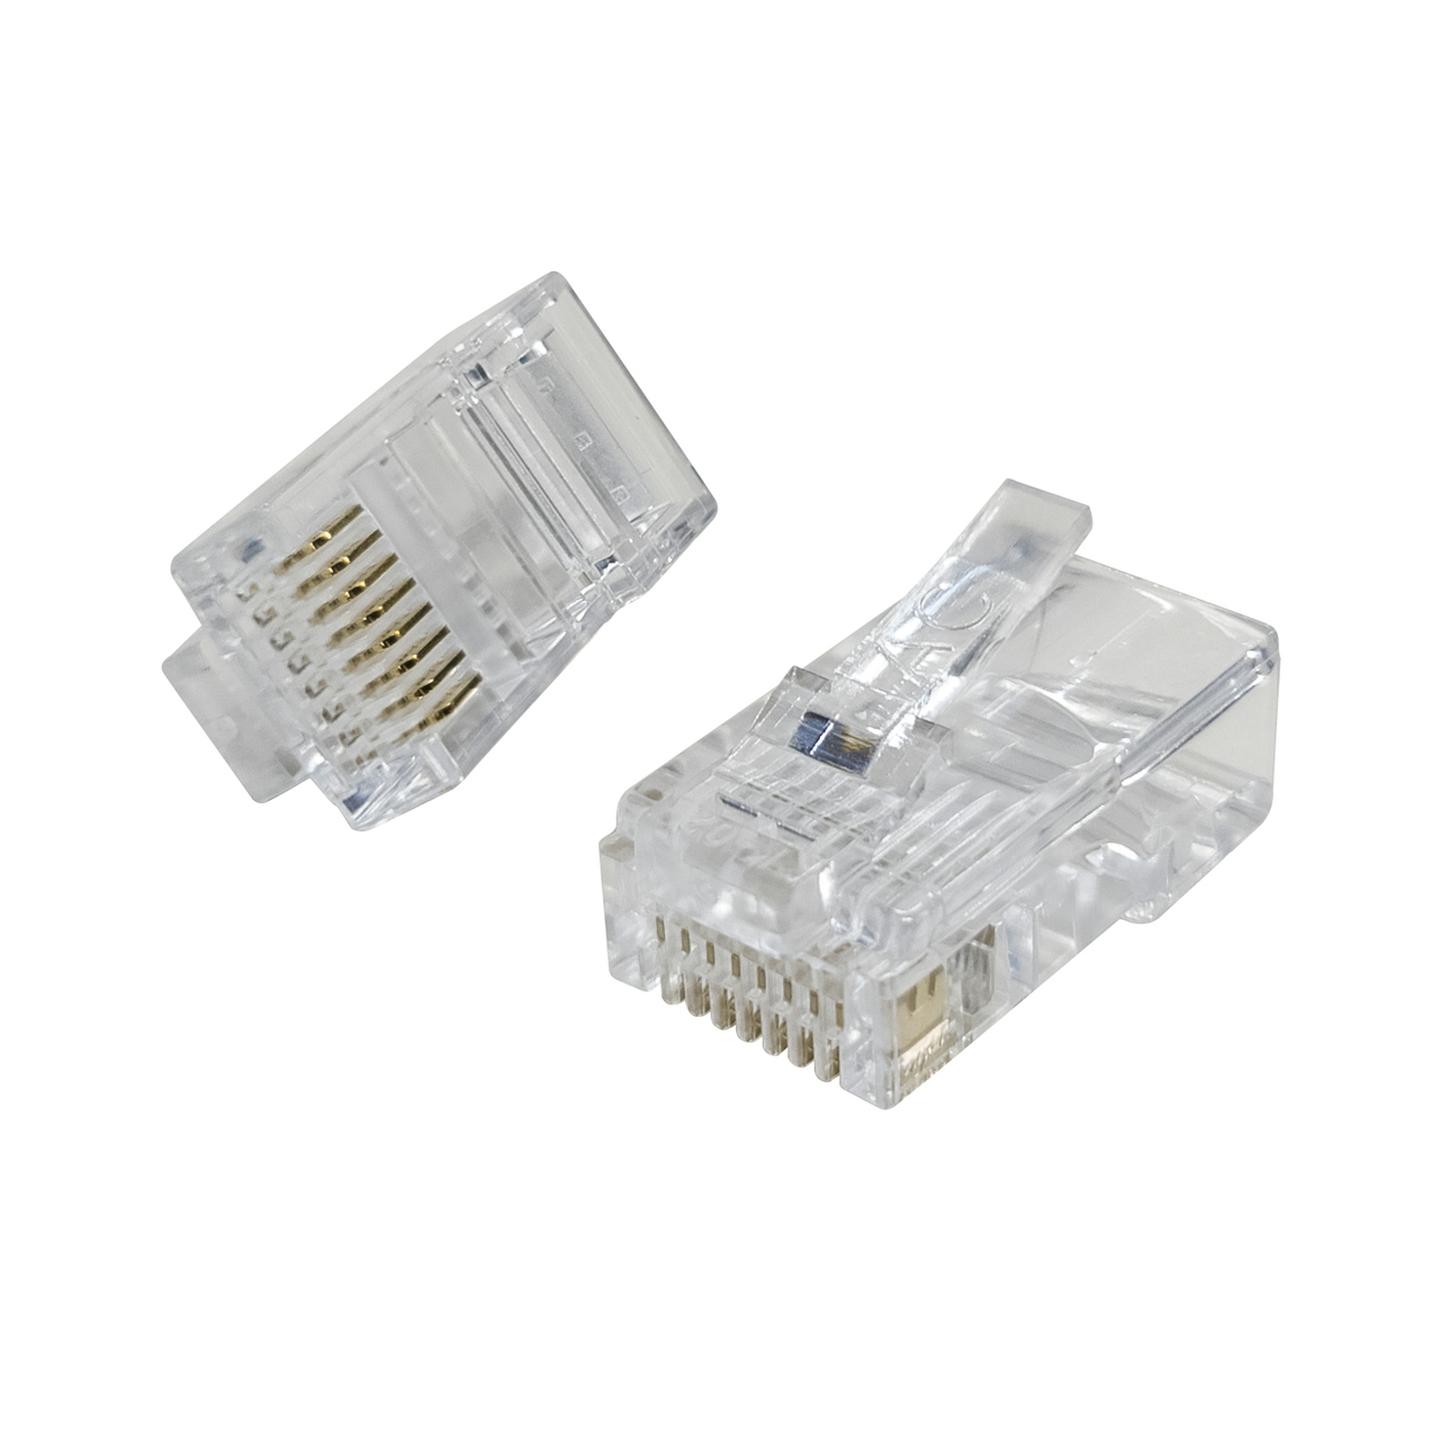 RJ45 Telephone plugs for SOLID CORE Cable - Pack of 50